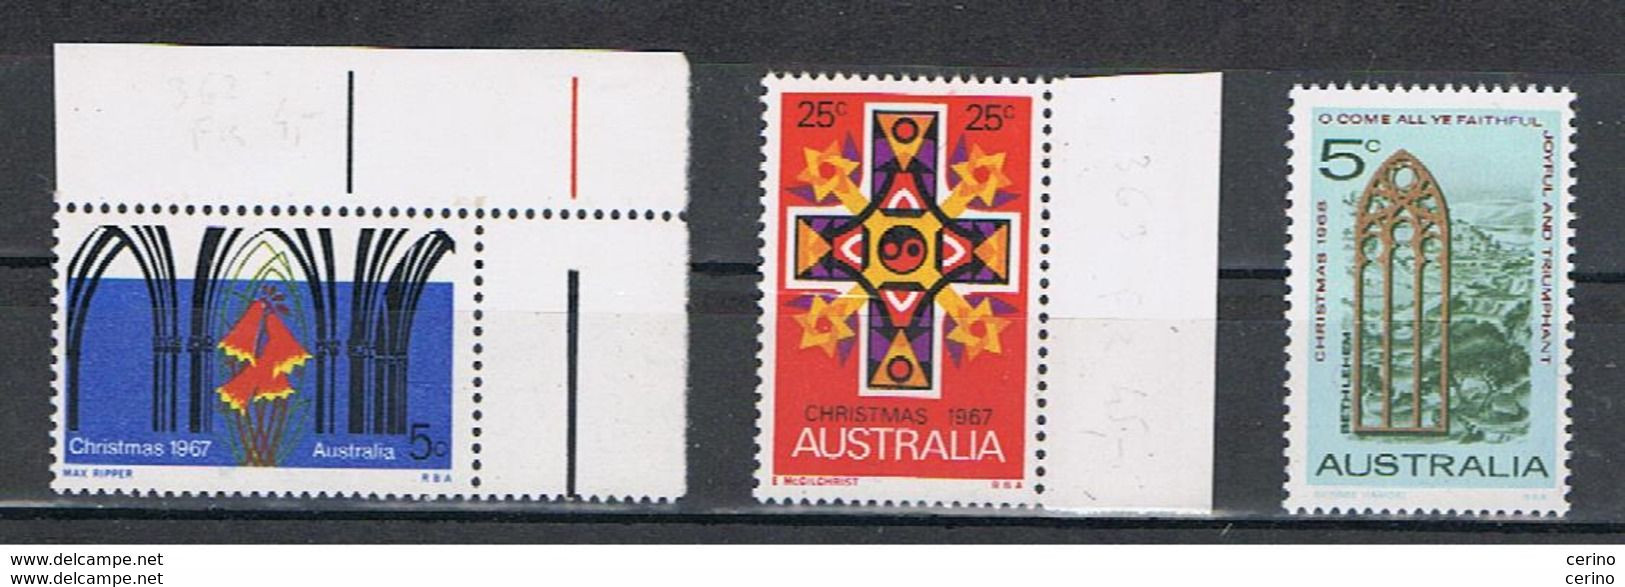 AUSTRALIA:  1967/68  COMMEMORATIVES  -  LOT  3  UNUSED  STAMPS  -  YV/TELL. 362//379 - Mint Stamps